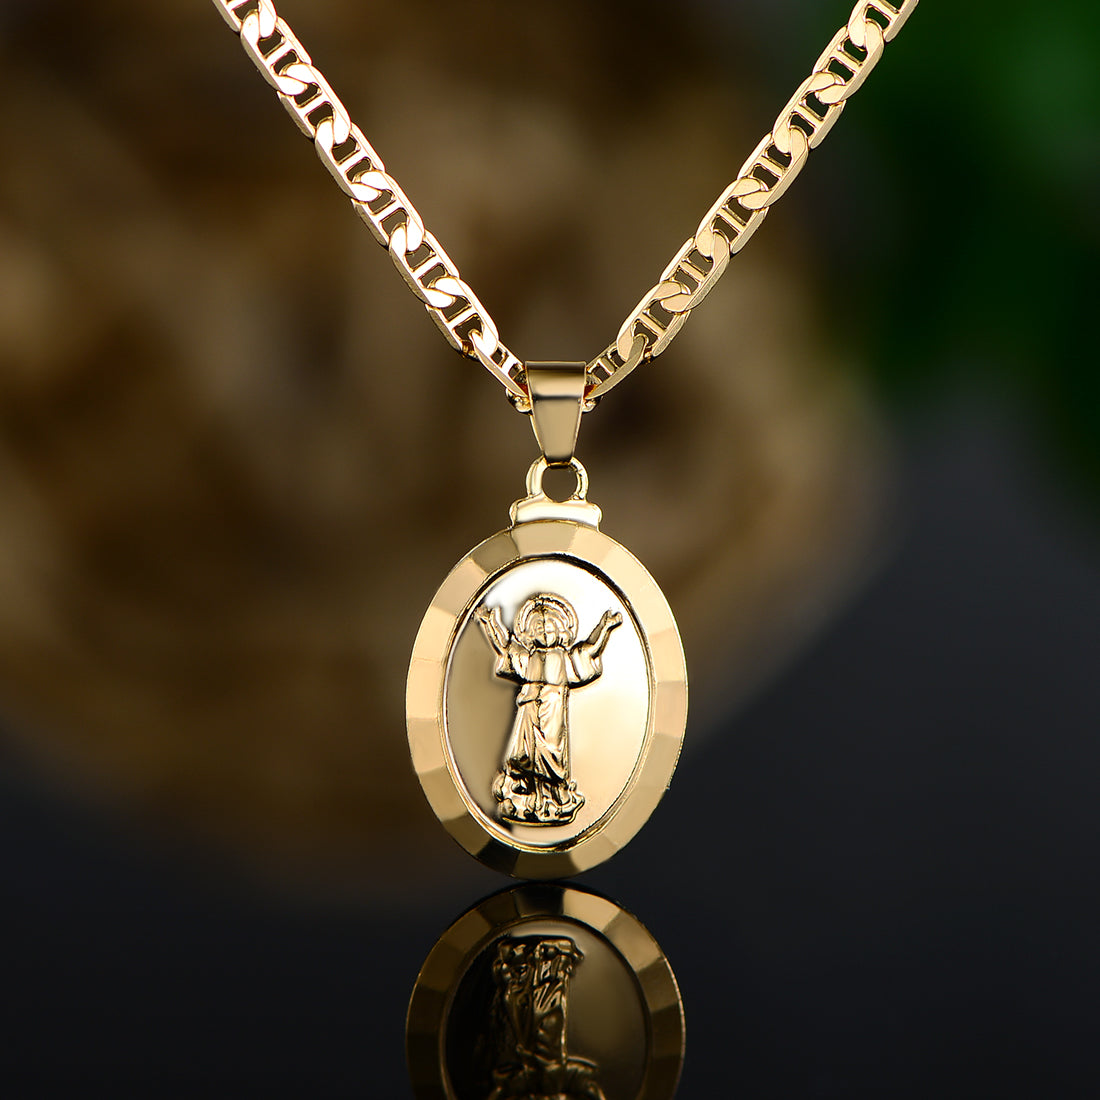 18K Gold Plated Baby Jesus Pendant Necklace